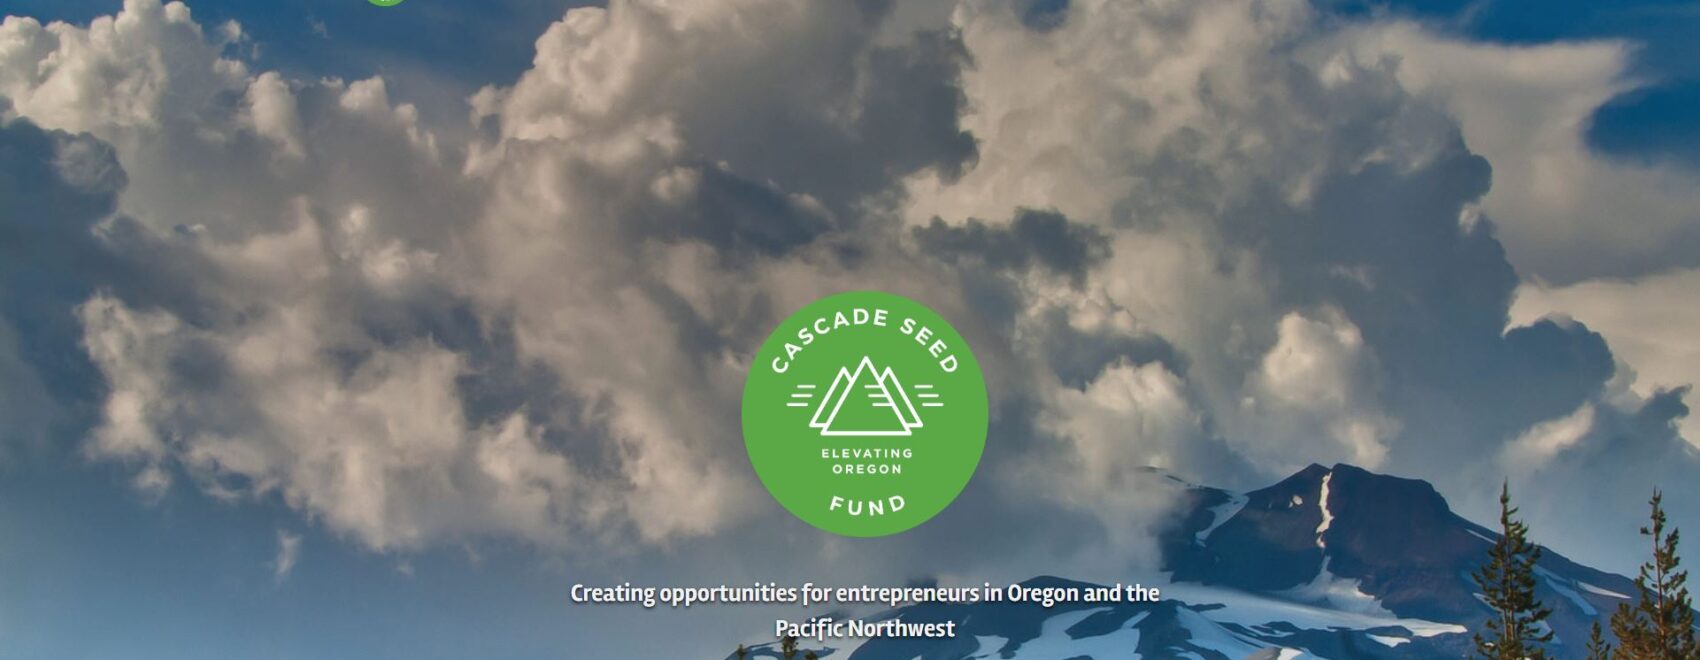 cascade seed fund homepage